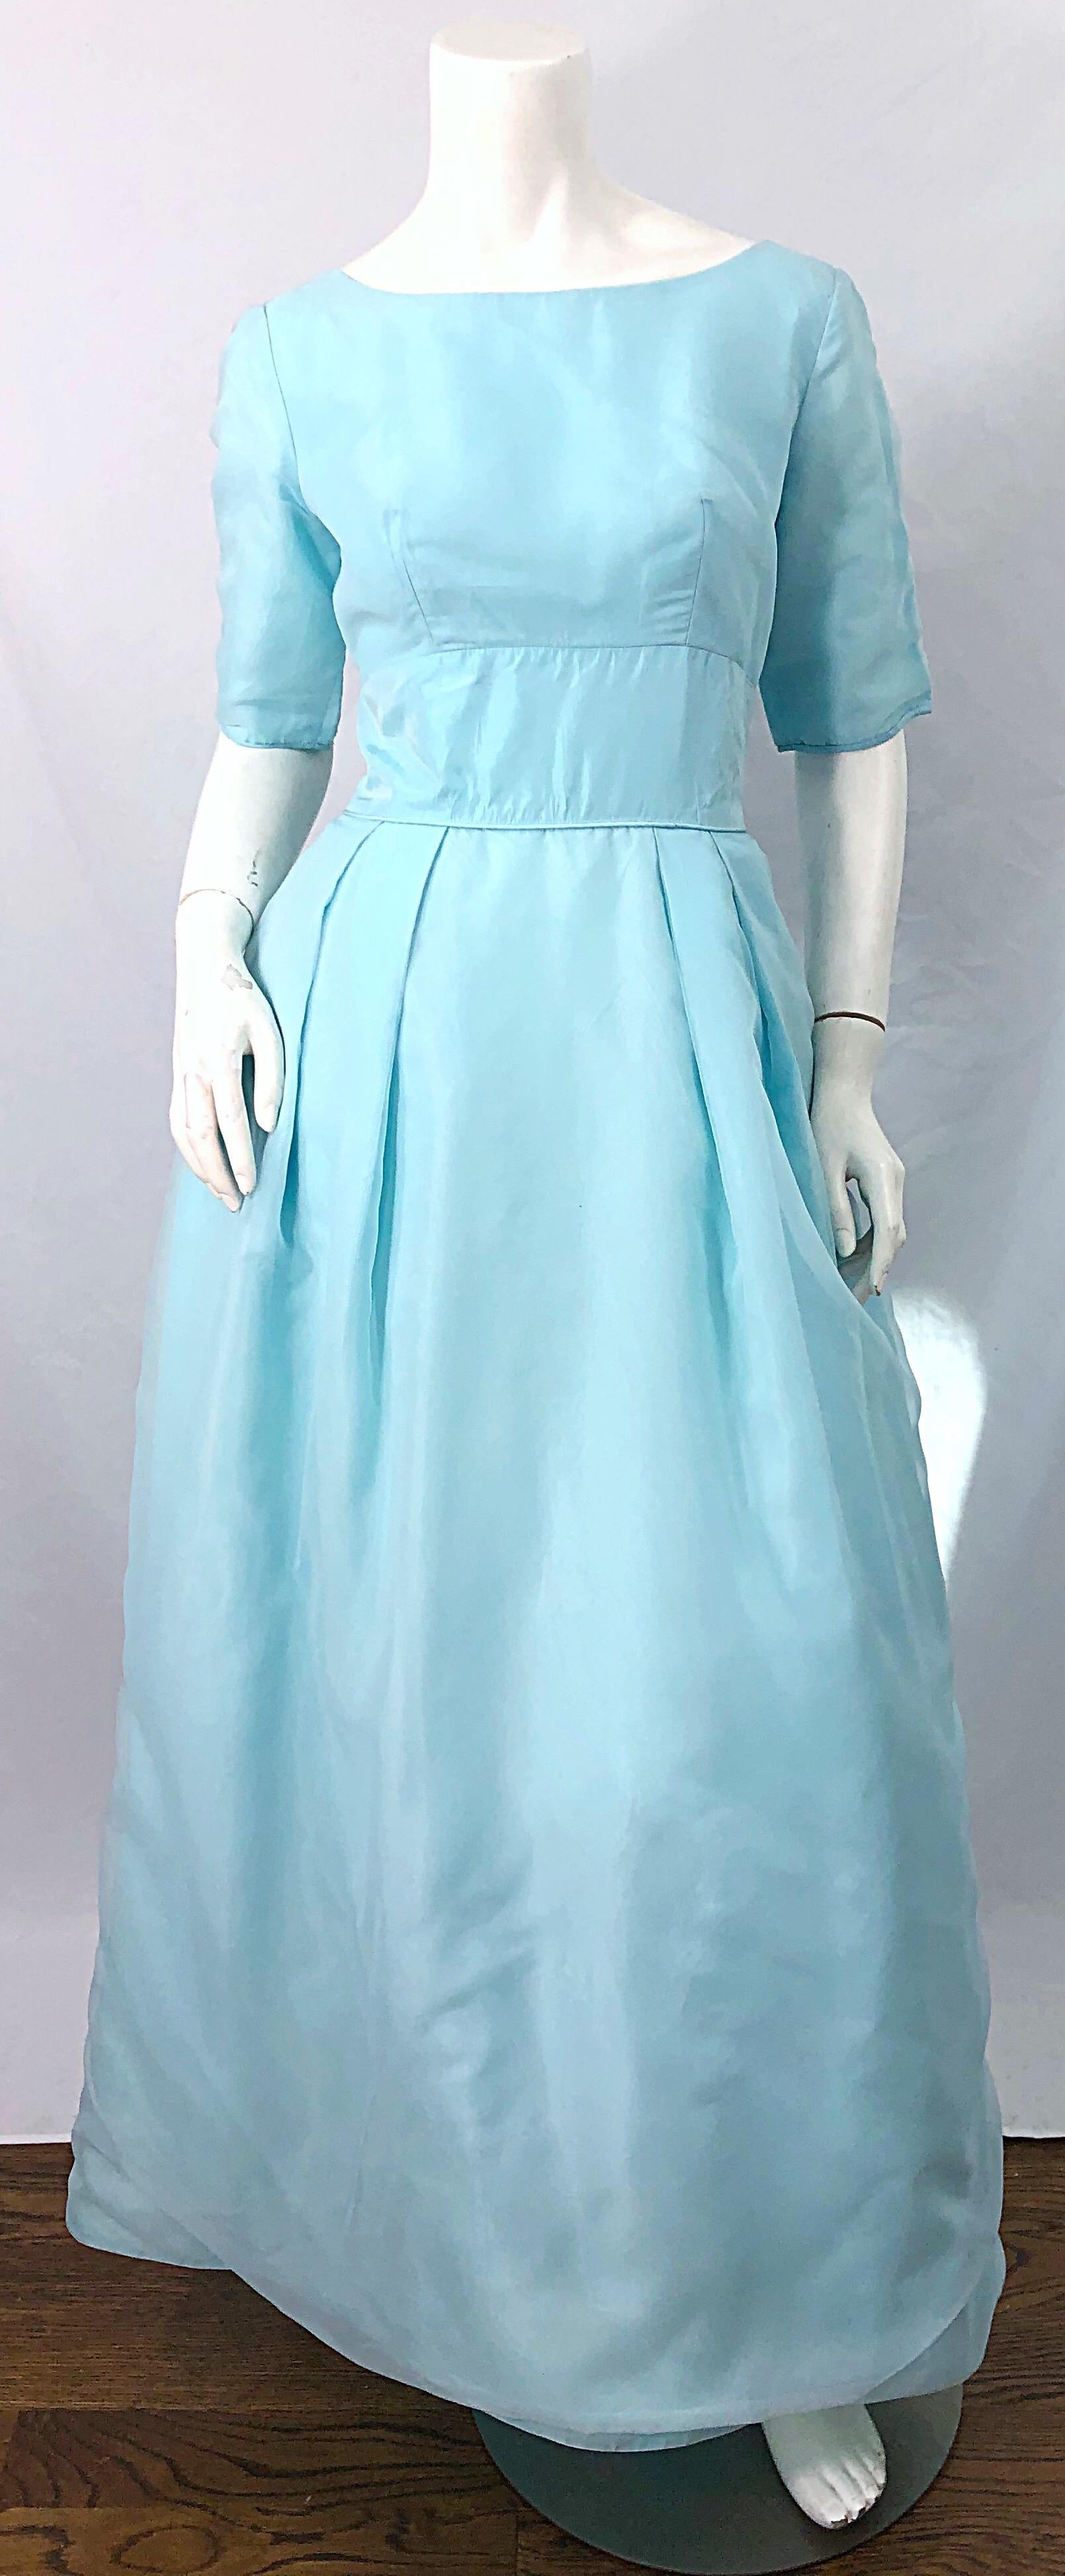 Have your Cinderella moment in this beautiful 1950s light blue silk chiffon and taffeta evening gown dress ! Features 3/4 sleeves with a tailored bodice and full skirt. Skirt has attached crinoline to add volume to the skirt. Hidden metal zipper up